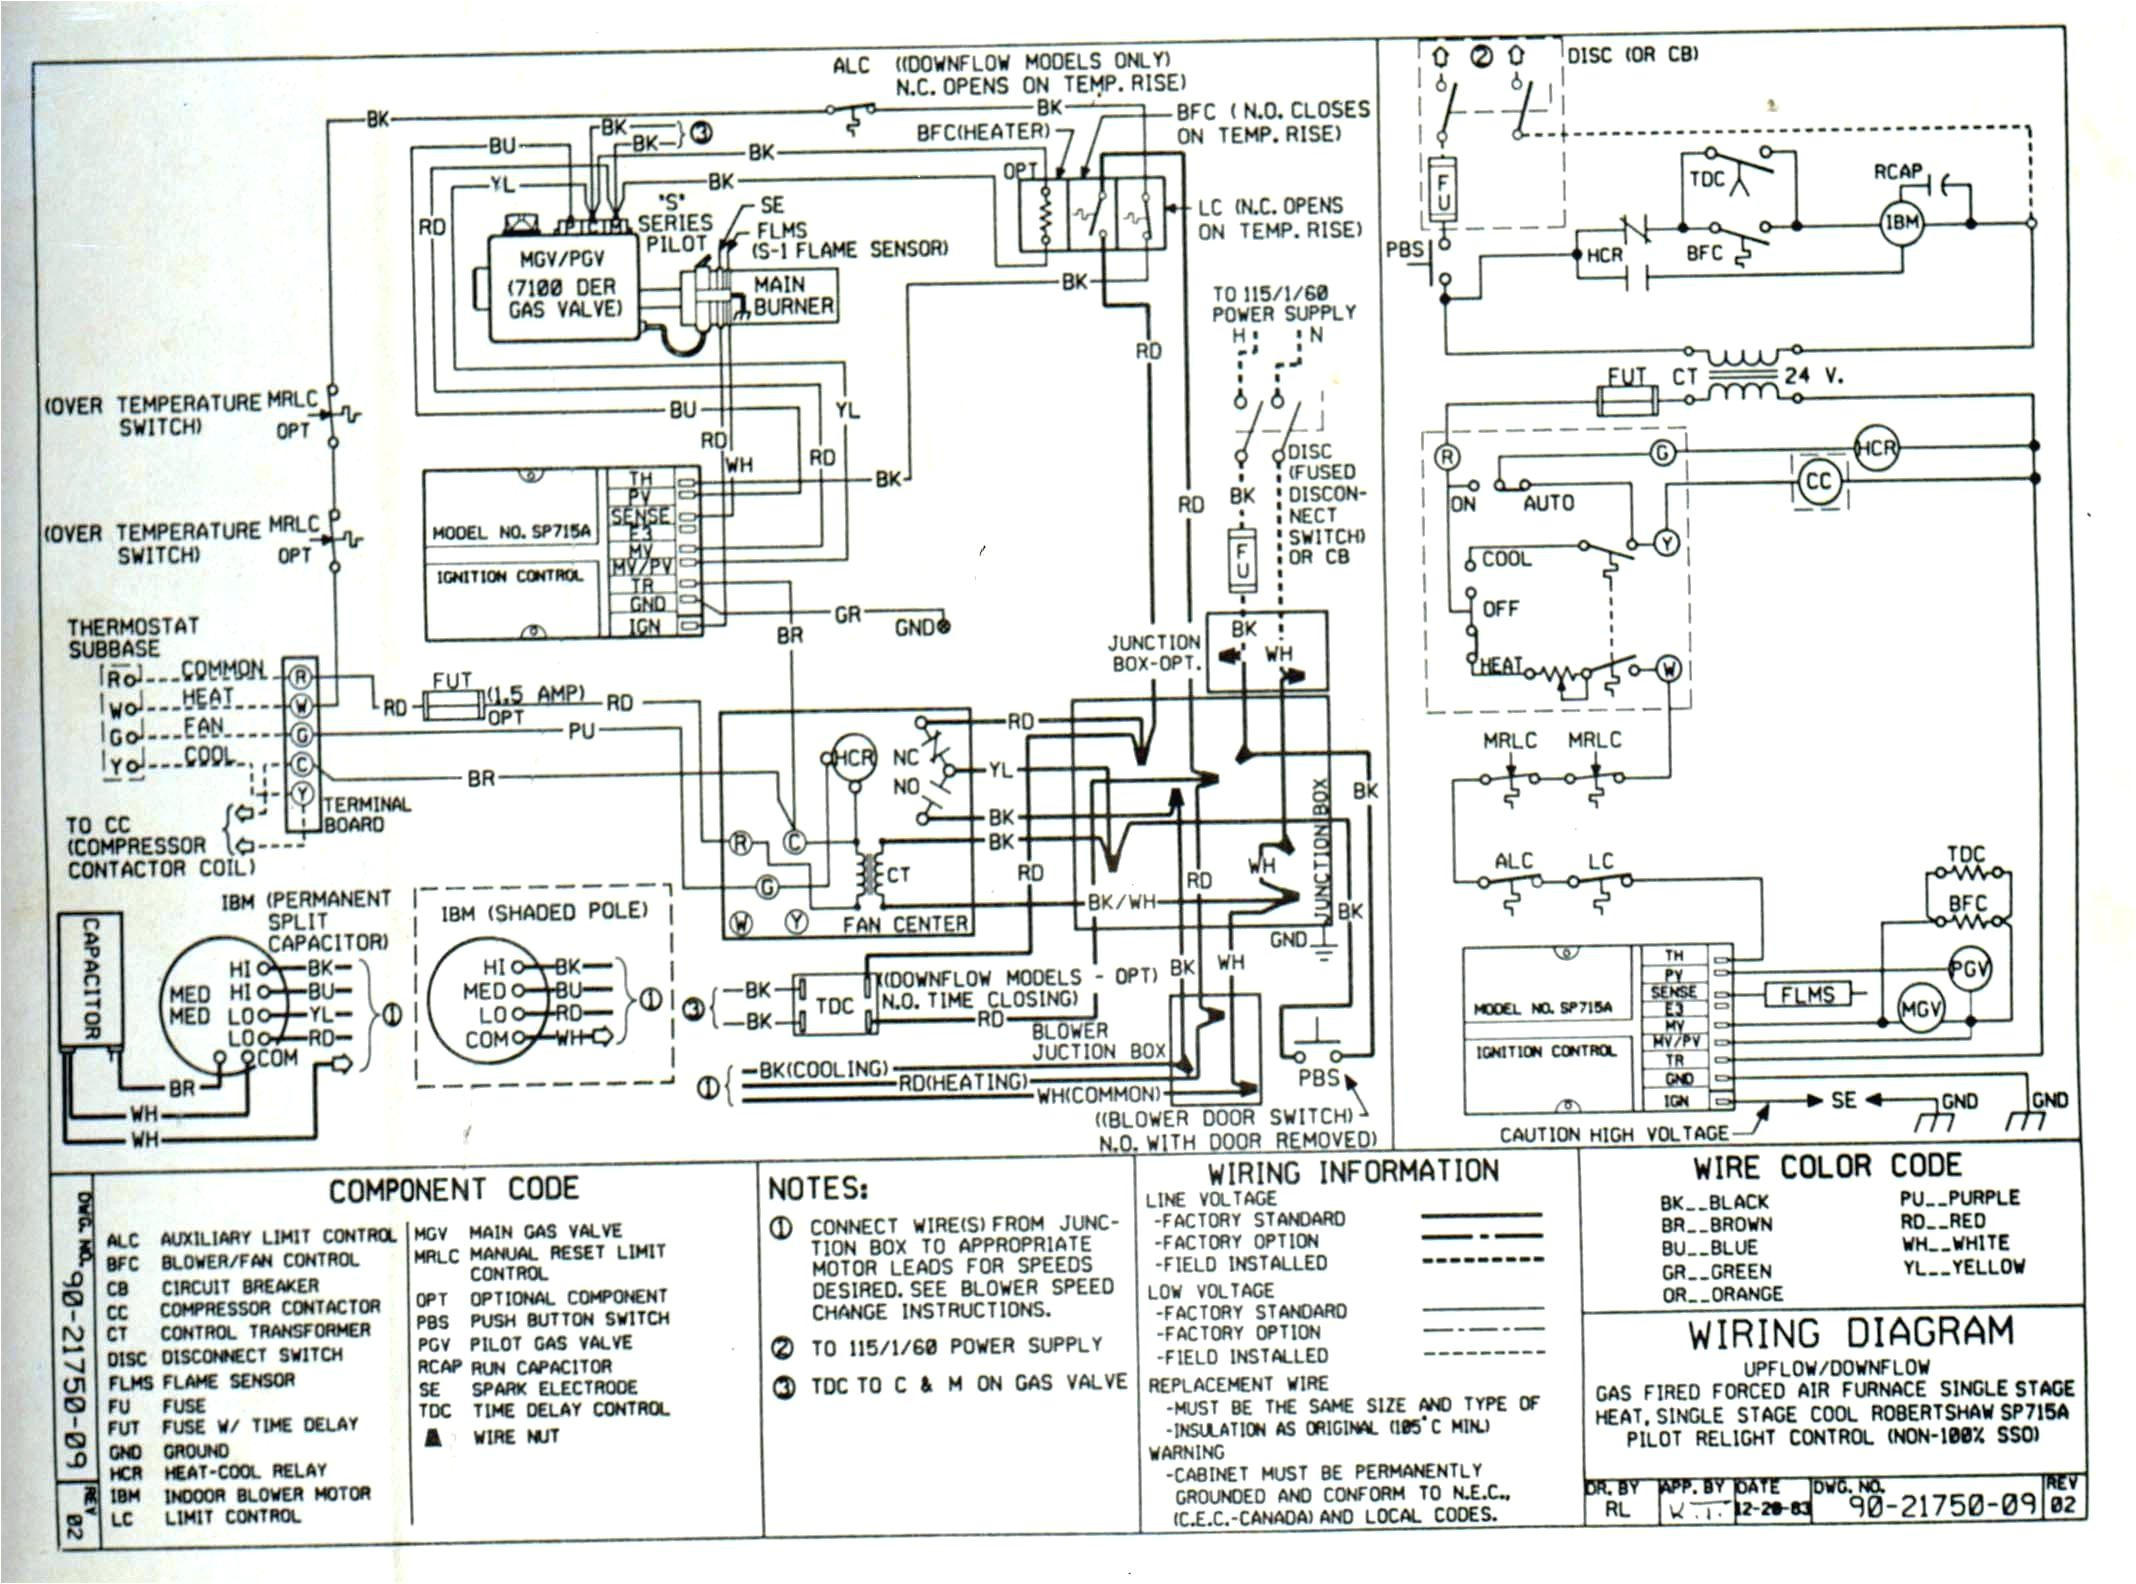 henry old furnace wiring diagram wiring diagram schematic old thermostat wiring diagram free download wiring diagram schematic